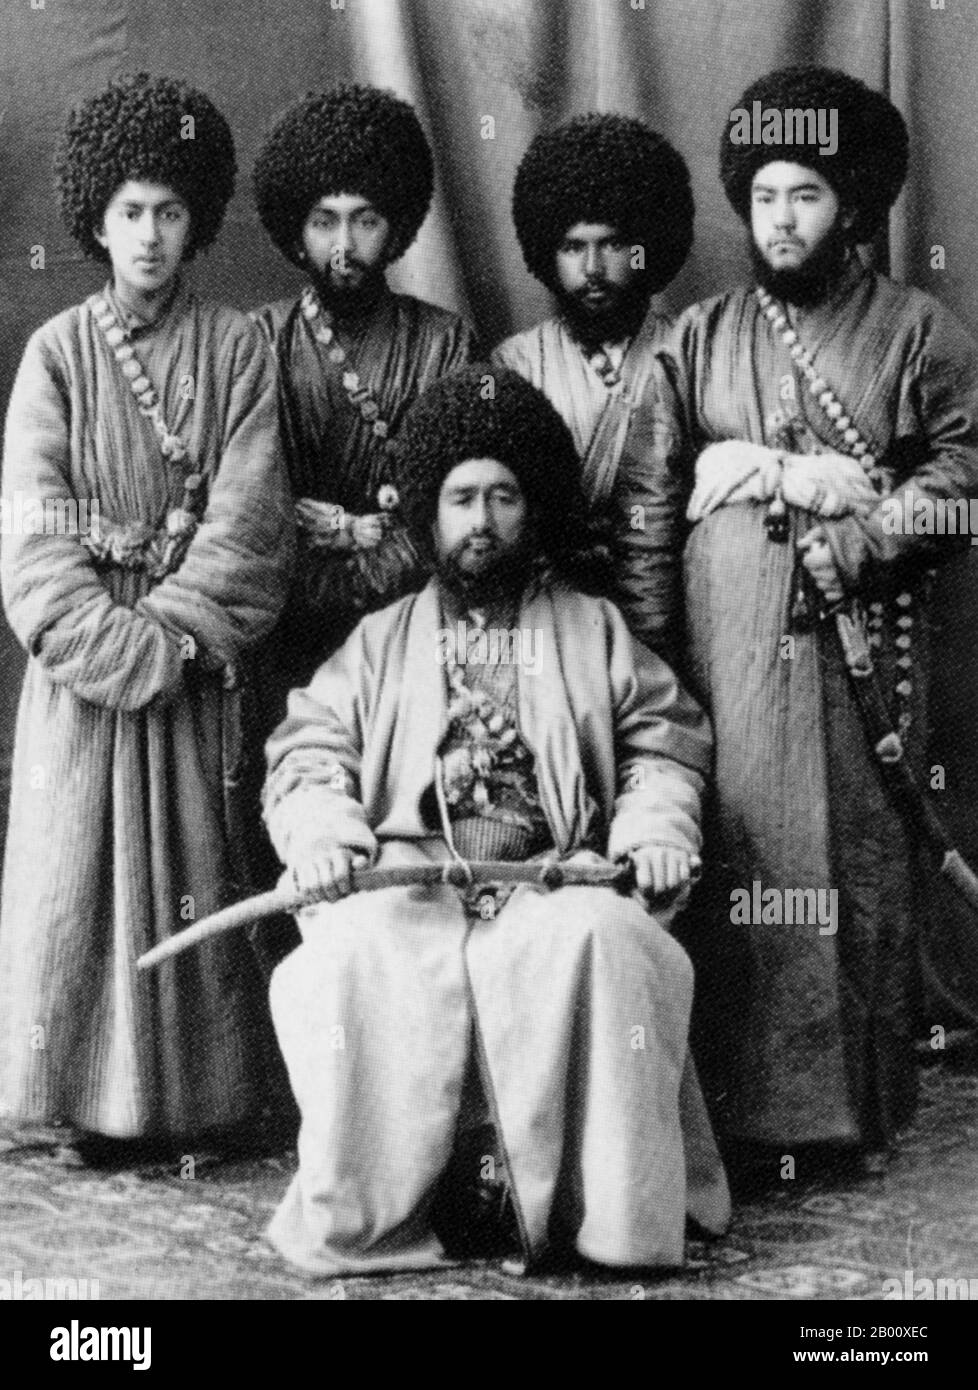 Uzbekistan: A high-ranking official of the Khanate of Khiva with his retinue, photographed by I. Volzhinsky c. 1896.  The Khanate of Khiva was a Central Asian state that existed in the historical region of Khwarezm from 1511 to 1920, except for a period of Persian occupation by Nadir Shah in 1740–46. Centered in the irrigated plains of the lower Amu Darya, south of the Aral Sea, with the capital in Khiva City, the country was ruled by the Kungrads, a branch of the Astrakhans, themselves a Genghisid dynasty. In 1873, the Khanate became a Russian protectorate Stock Photo